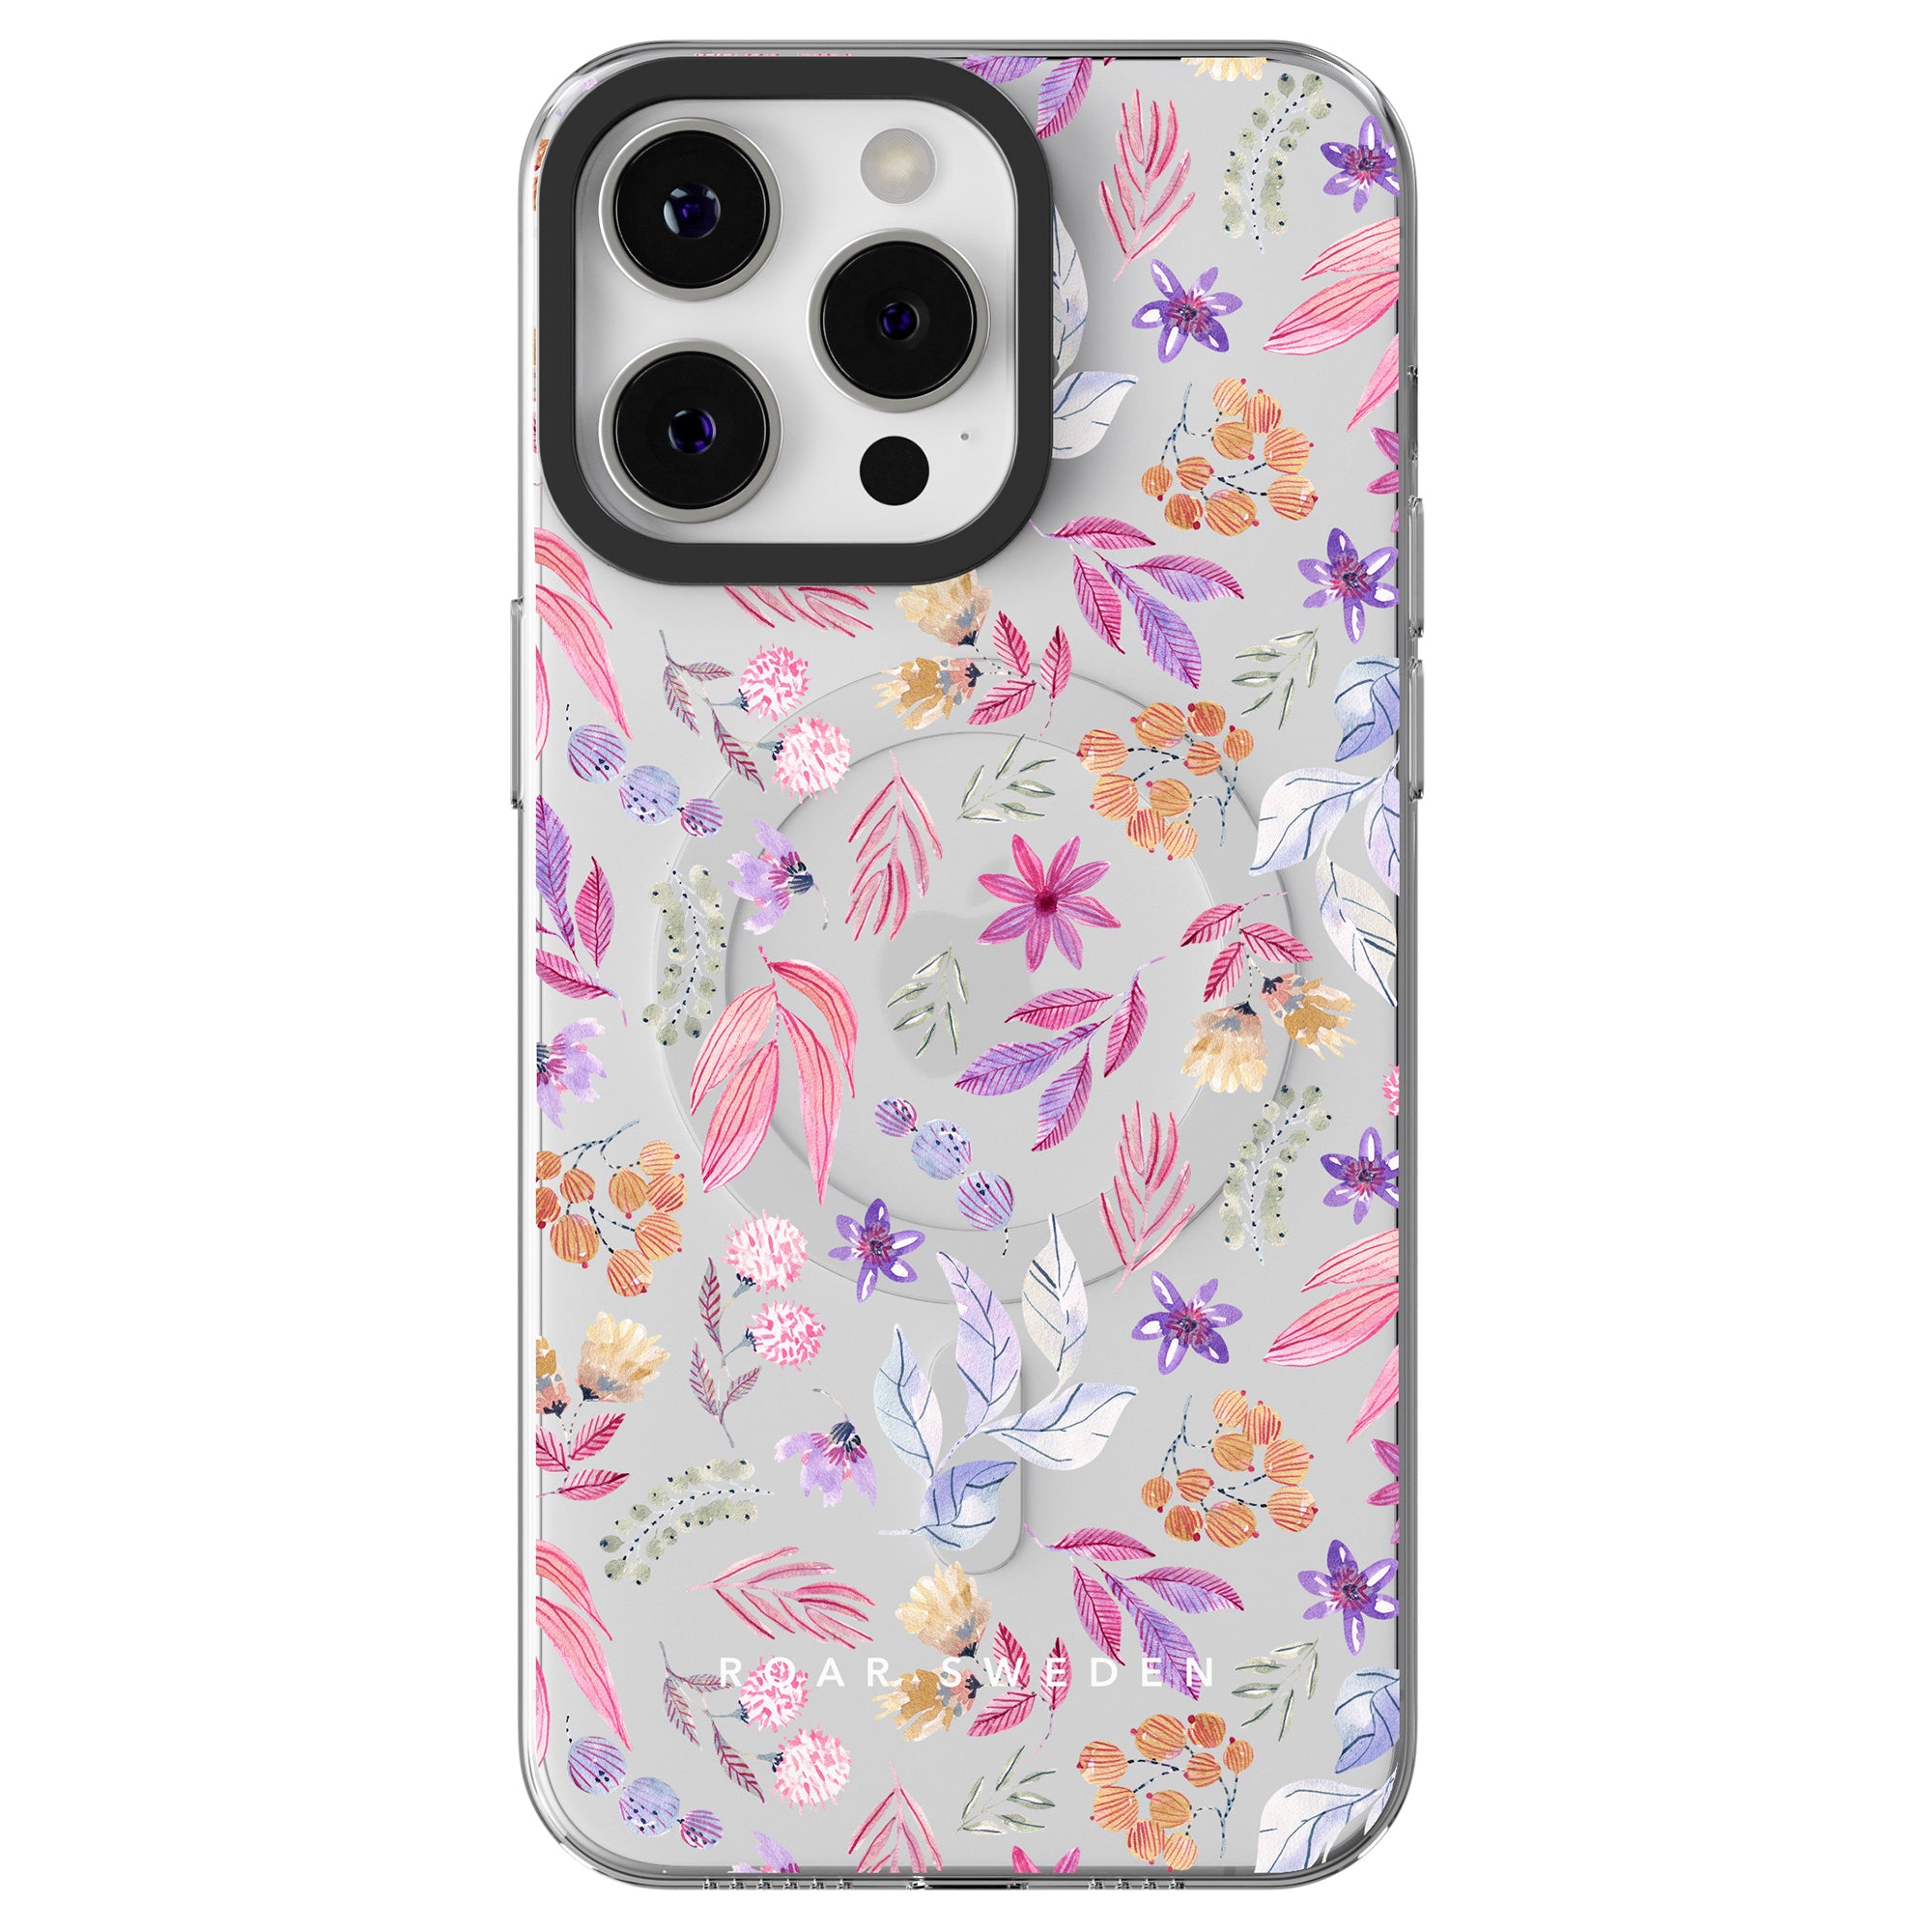 A smartphone with a Flower Power - MagSafe case featuring pink, purple, and orange flowers on a white background.